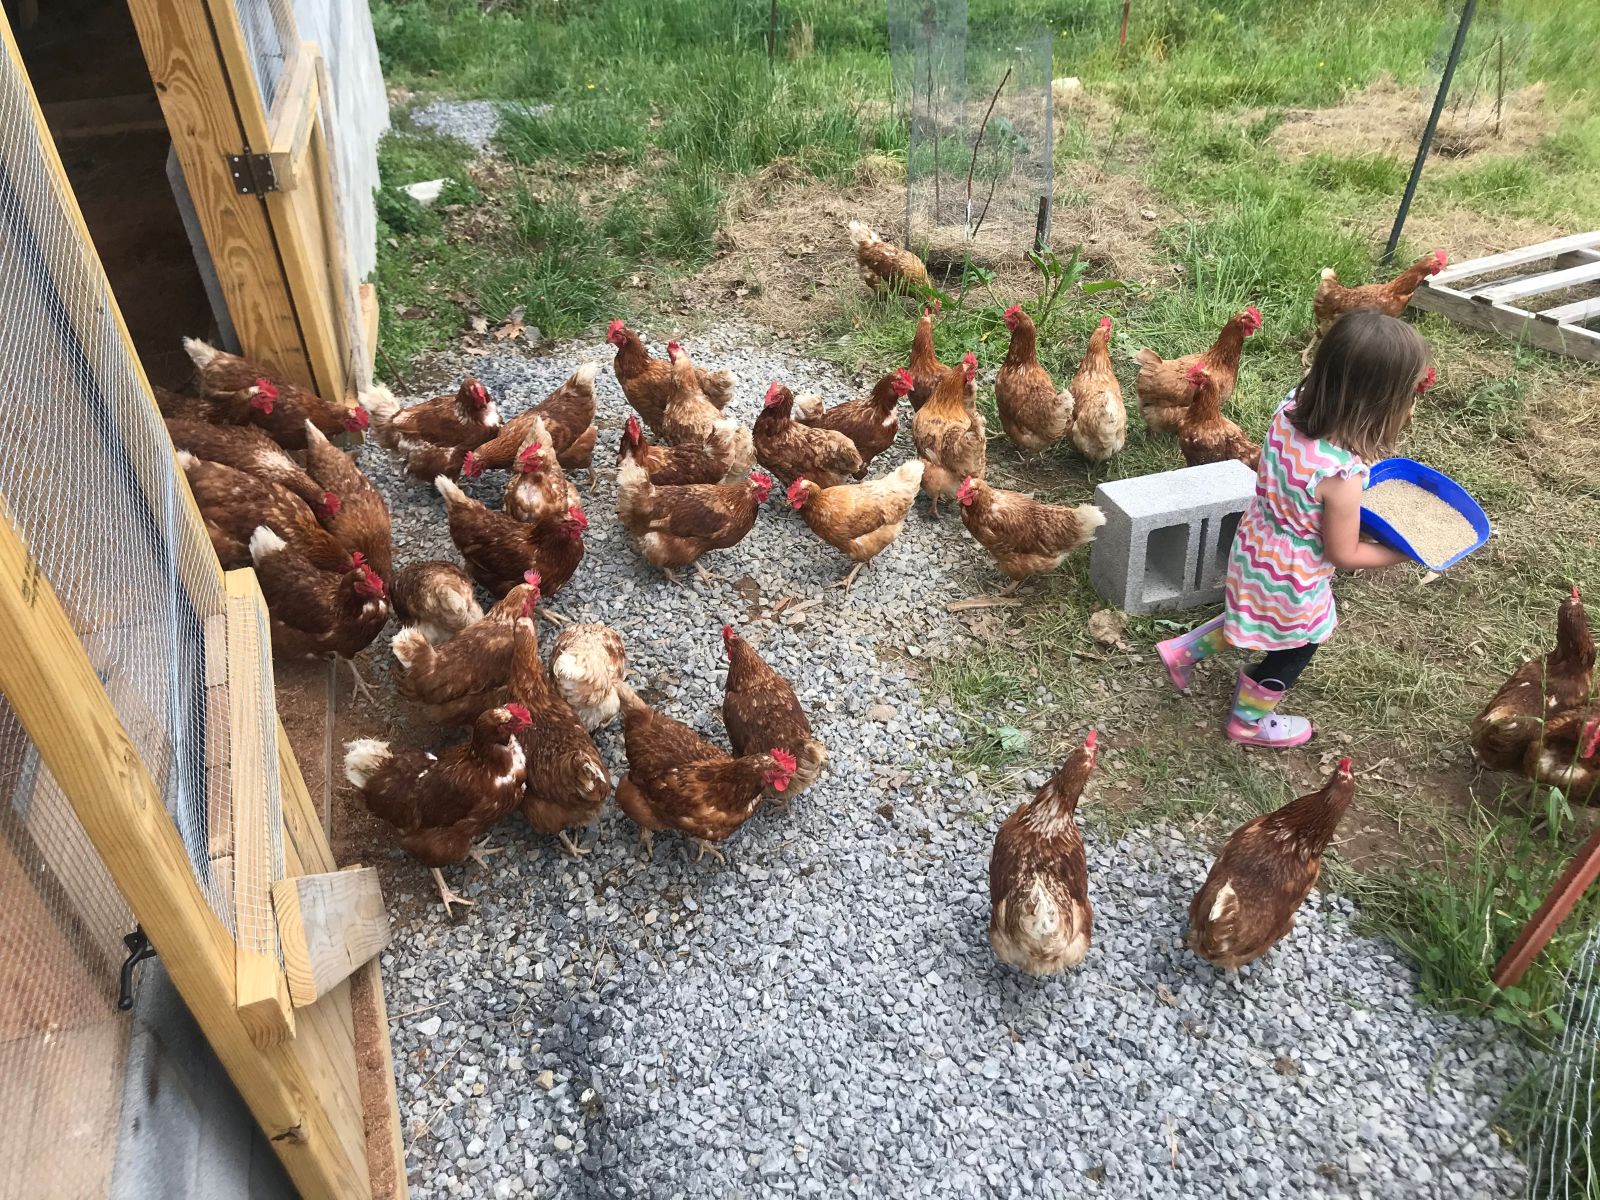 Clare leads the chickens in a breakfast song